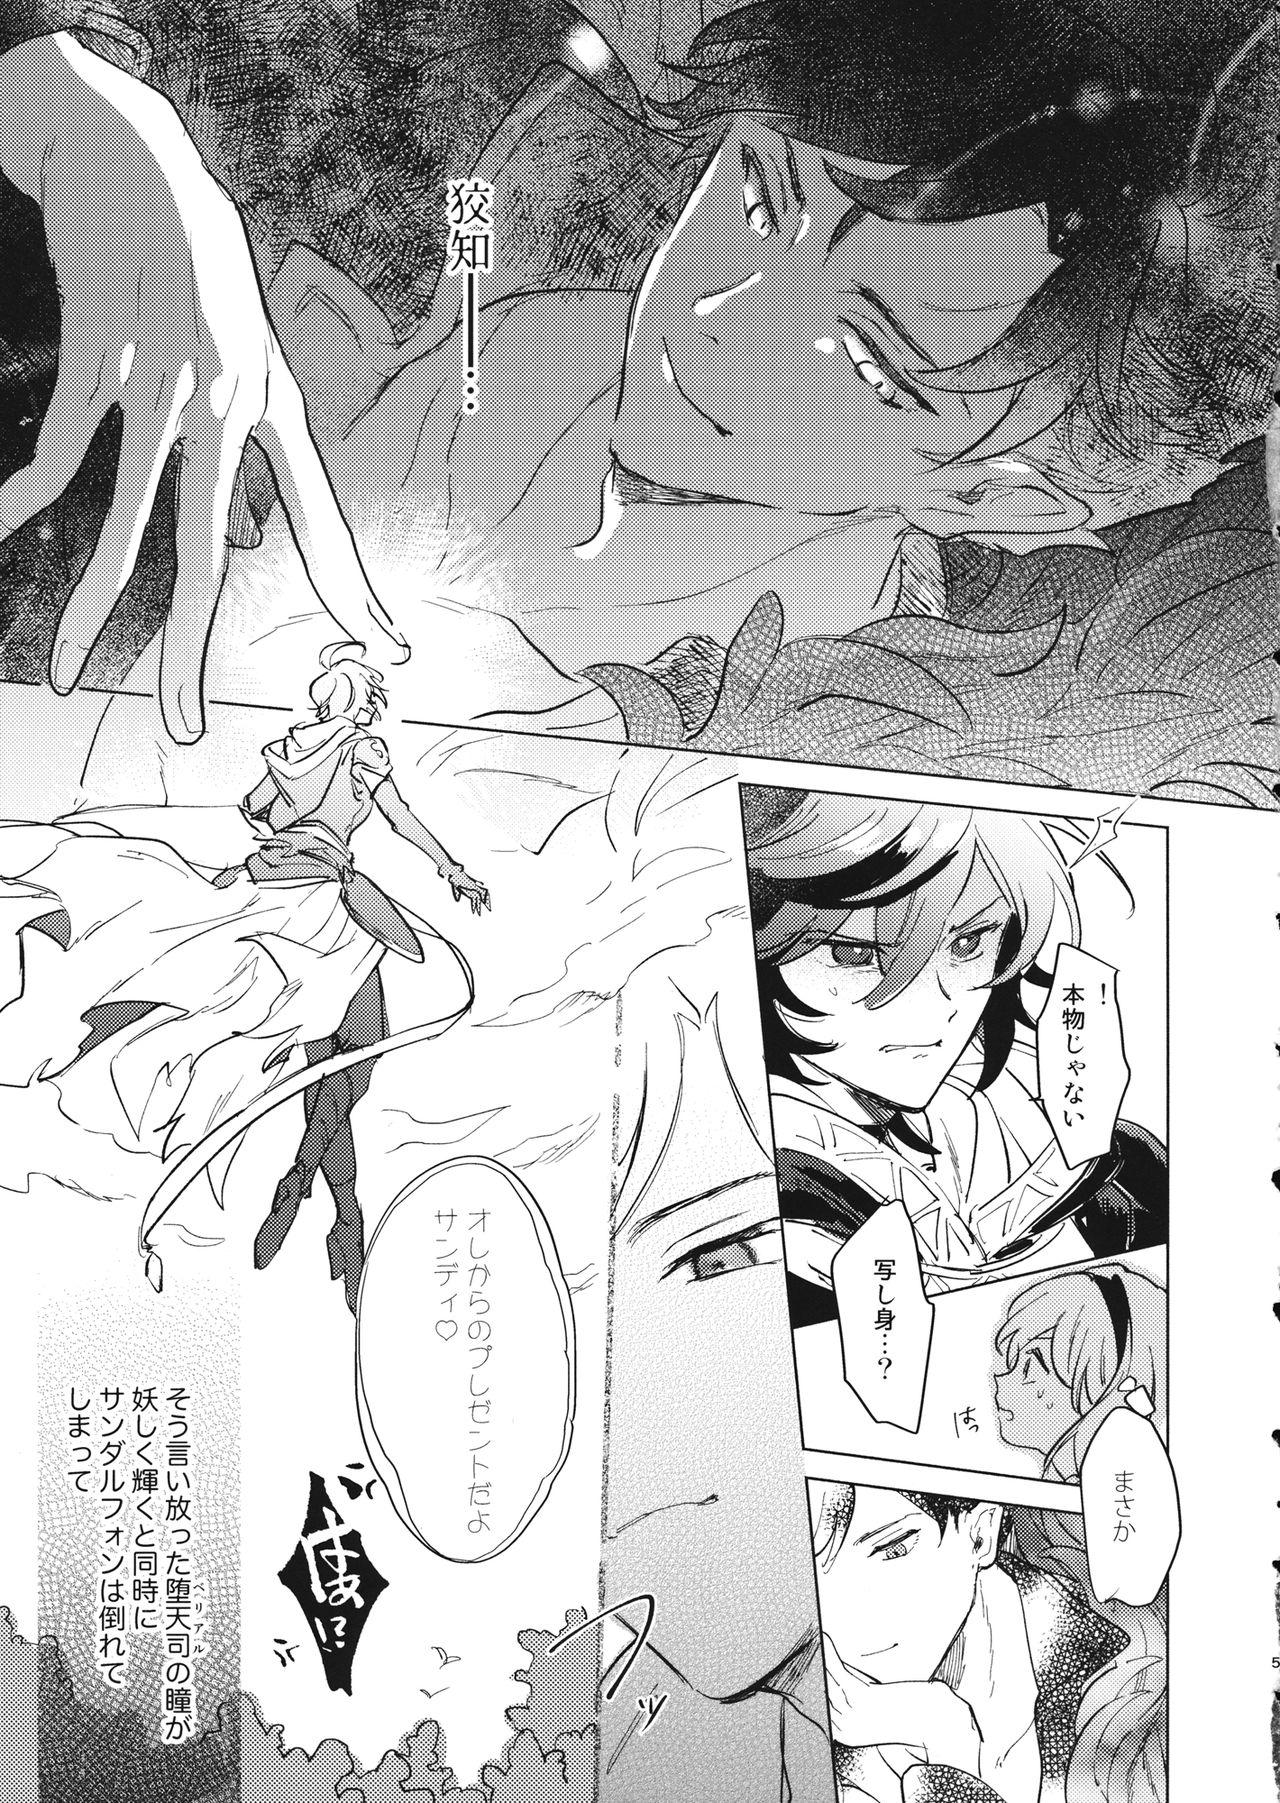 Cum In Pussy 災い転じて熱となれ - Granblue fantasy Gay Public - Page 6